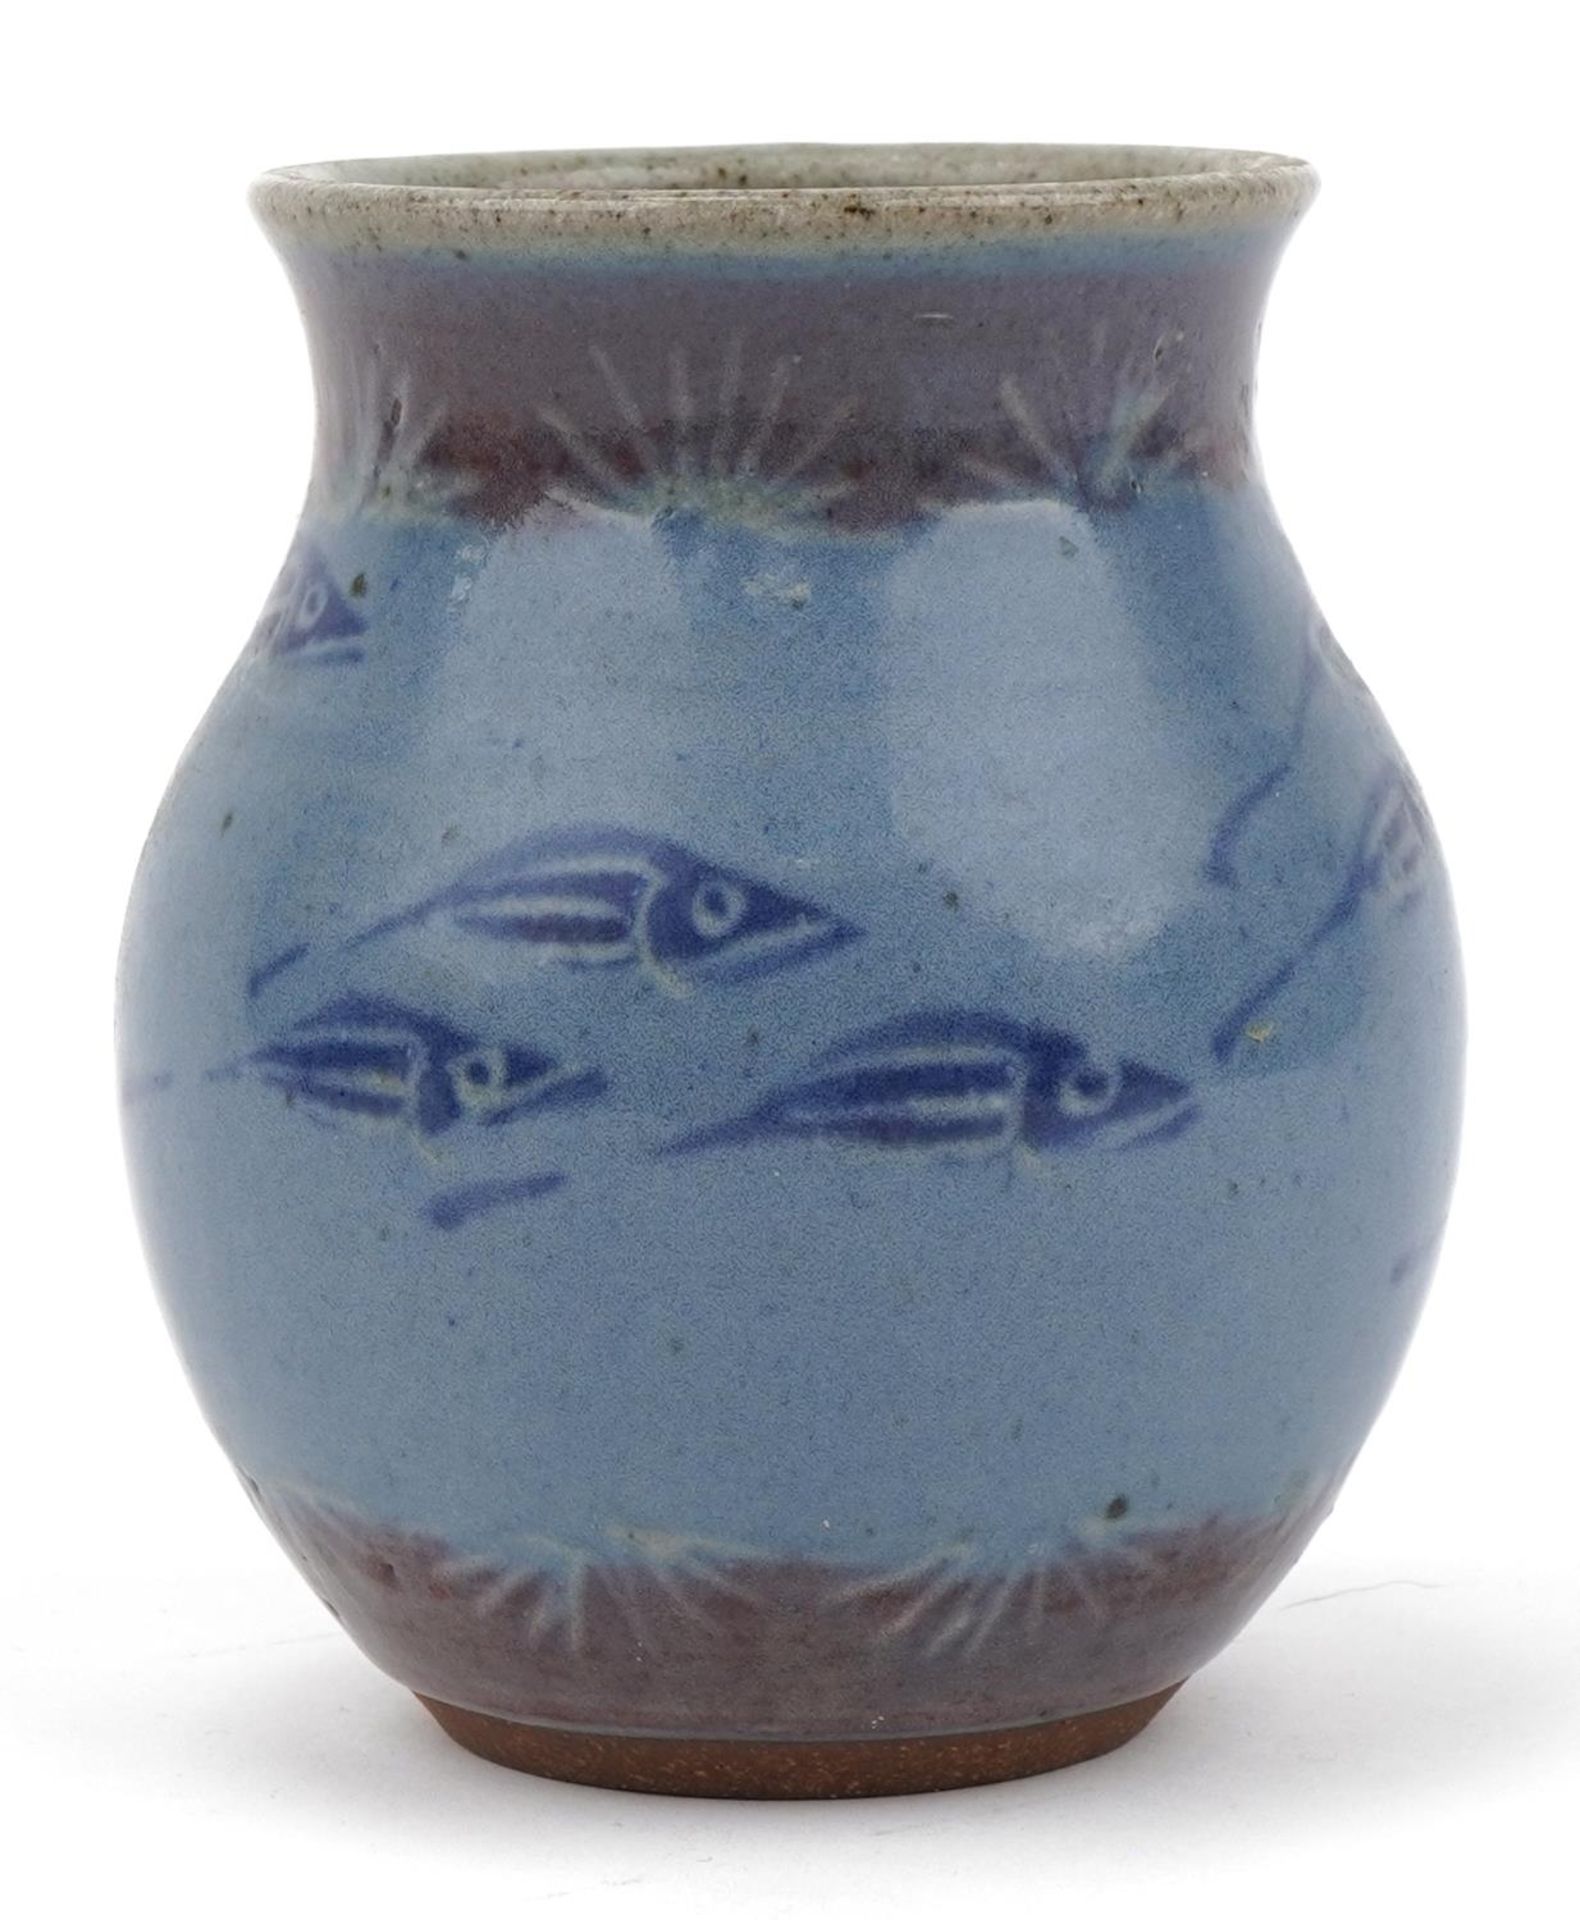 St Ives studio pottery vase hand painted with stylised fish, 12cm high - Image 4 of 6